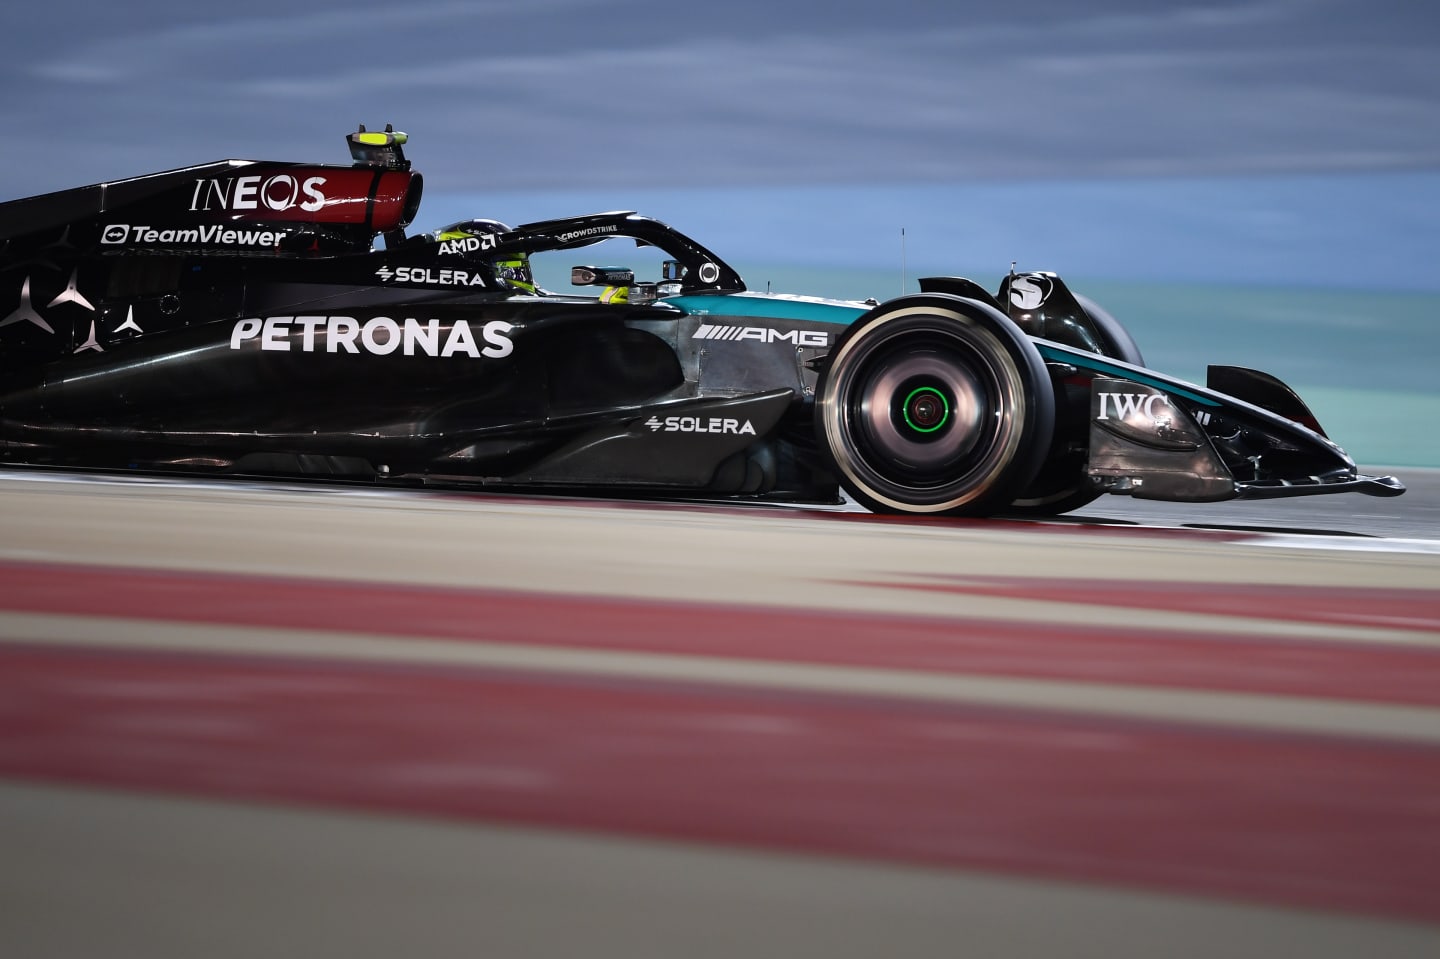 BAHRAIN, BAHRAIN - MARCH 02: Lewis Hamilton of Great Britain driving the (44) Mercedes AMG Petronas F1 Team W15 on track during the F1 Grand Prix of Bahrain at Bahrain International Circuit on March 02, 2024 in Bahrain, Bahrain. (Photo by Rudy Carezzevoli/Getty Images)